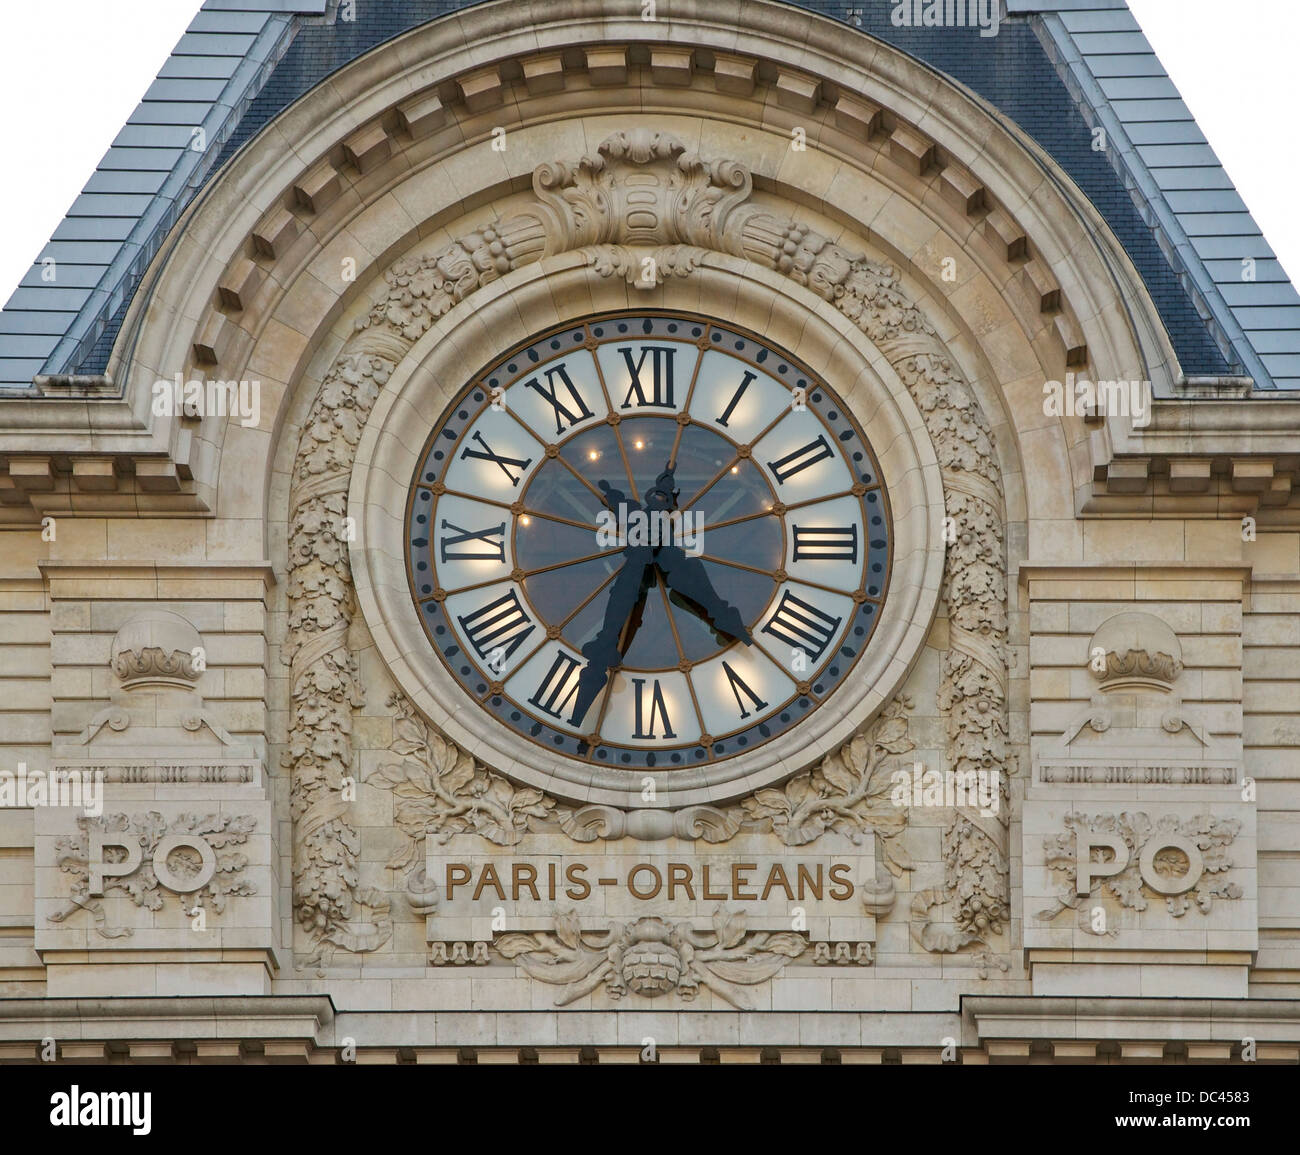 One of the two clocks of the former Orsay station, now 'Musée d'Orsay' (art of the 19th century) in Paris. 'Paris-Orléans' (P-O) Stock Photo